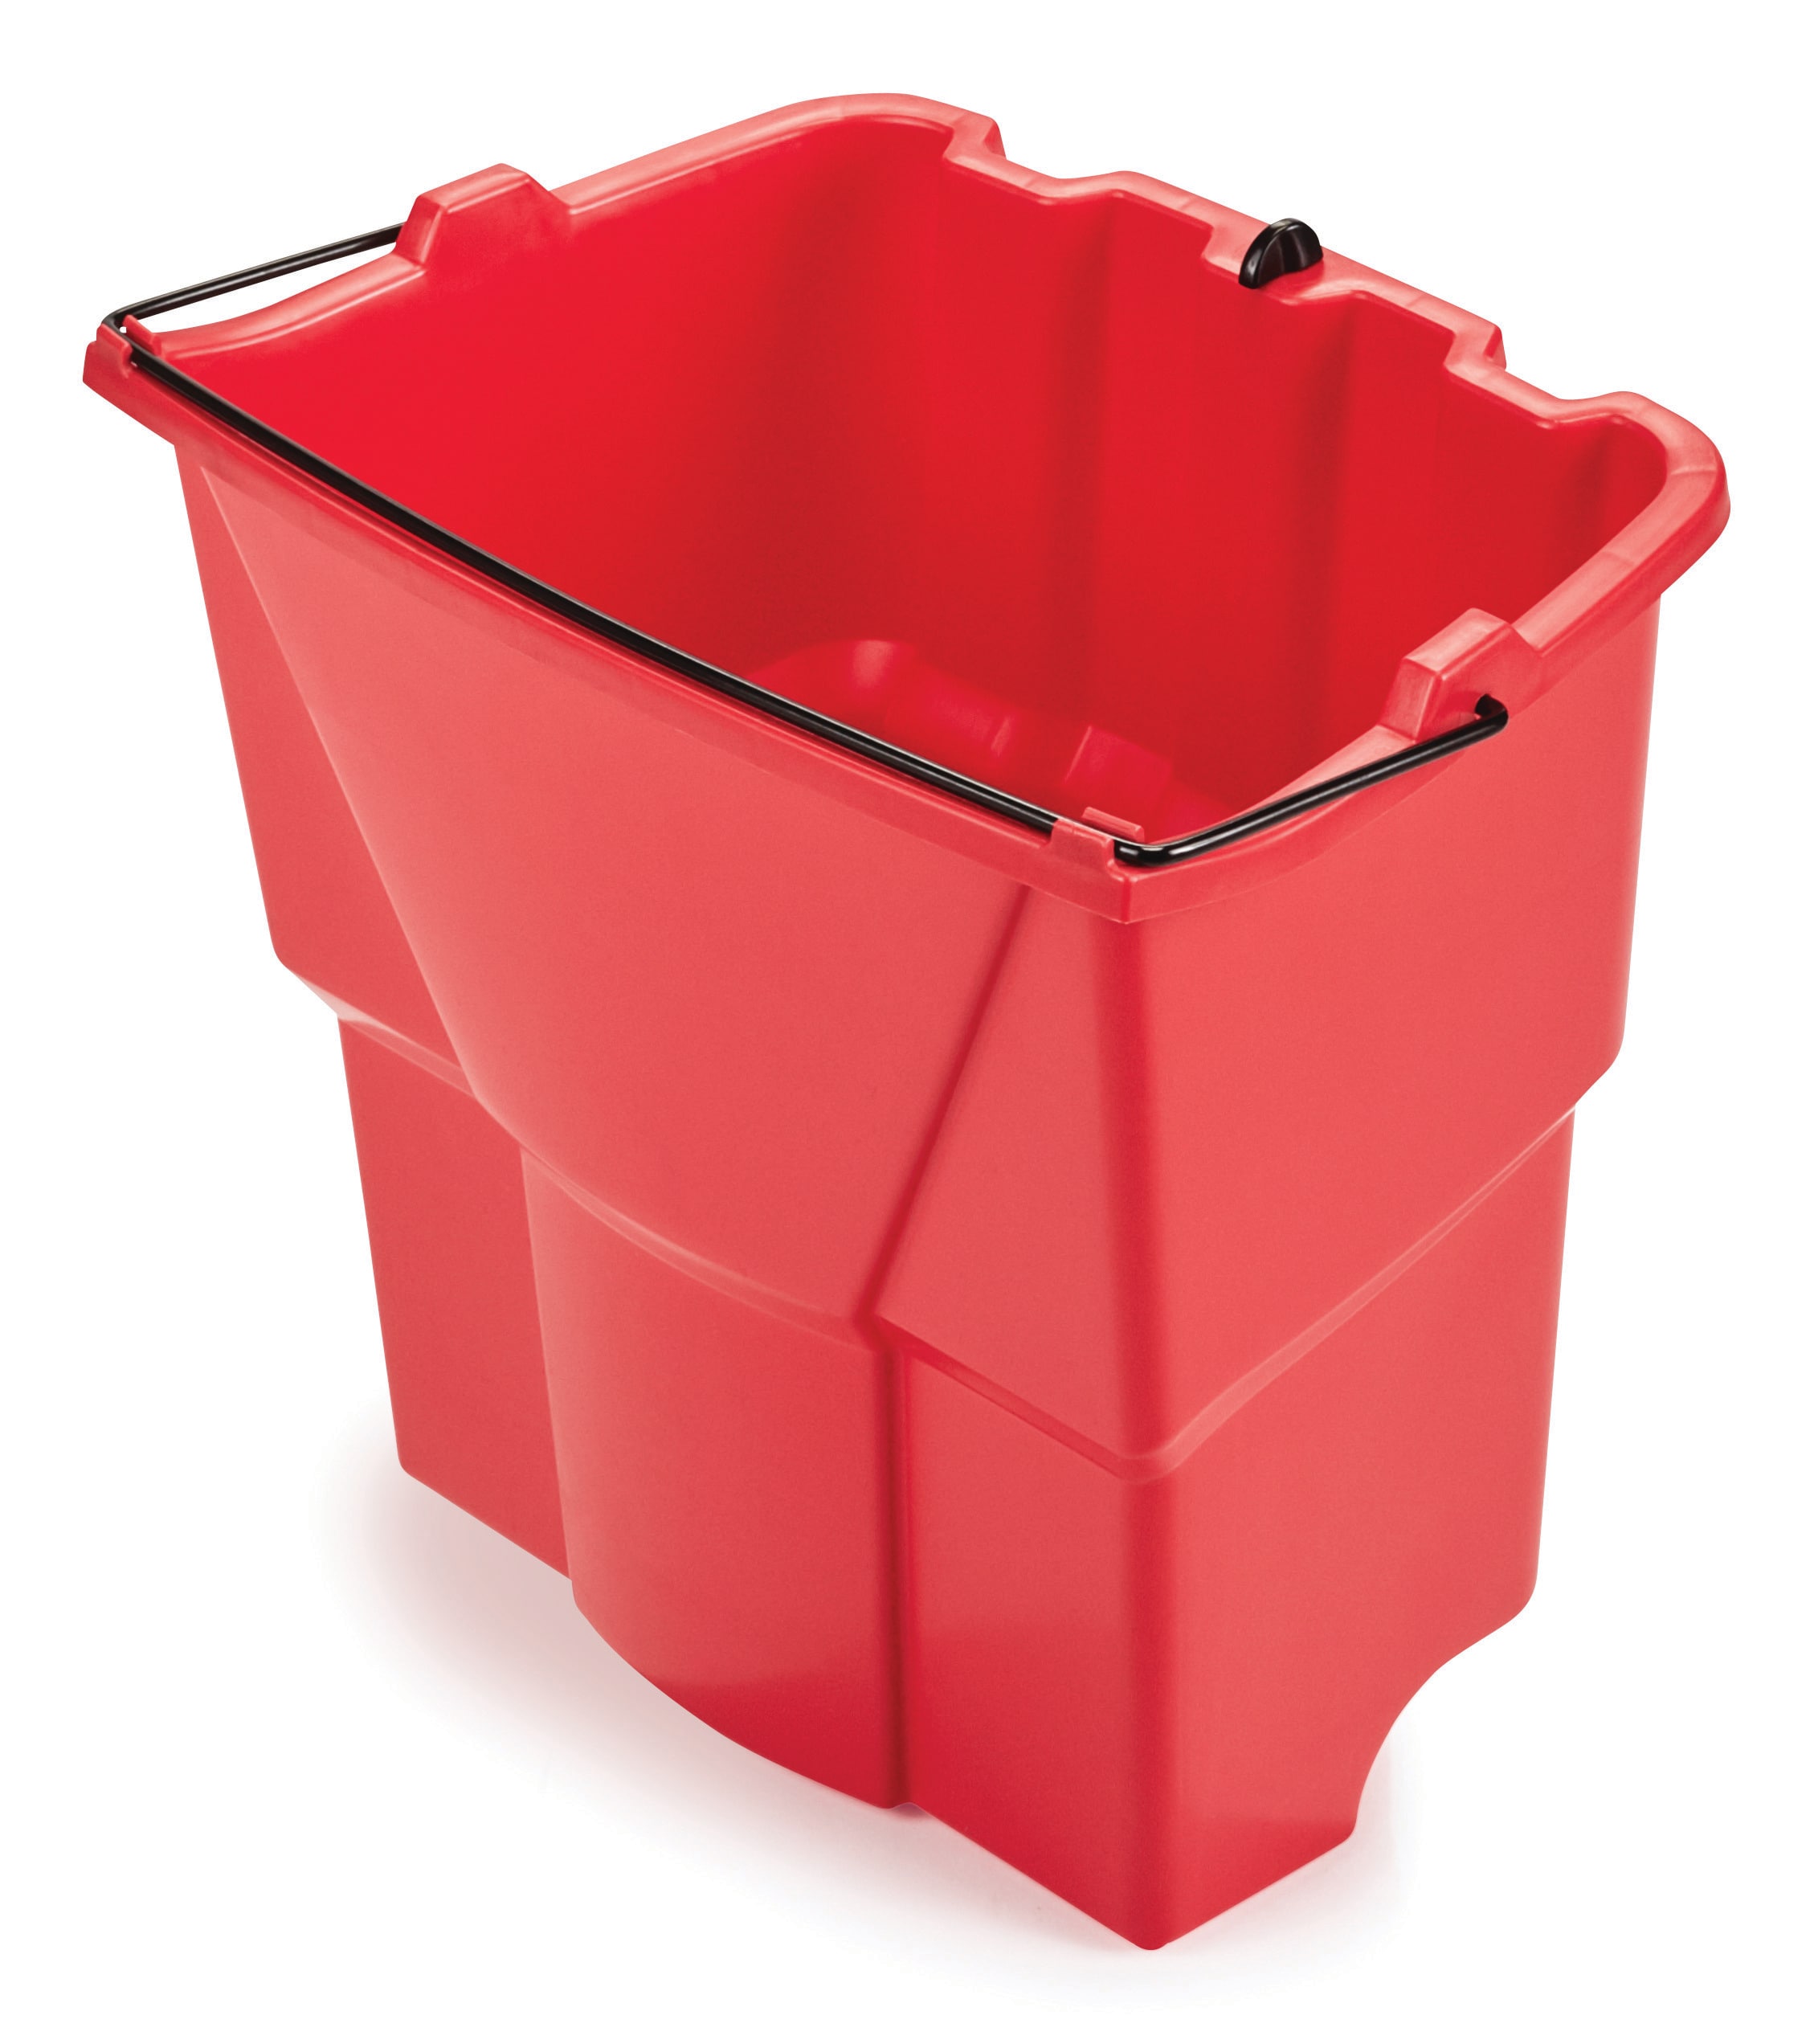 Rubbermaid Commercial 31 Qt. All-in-one Tandem Mopping Bucket